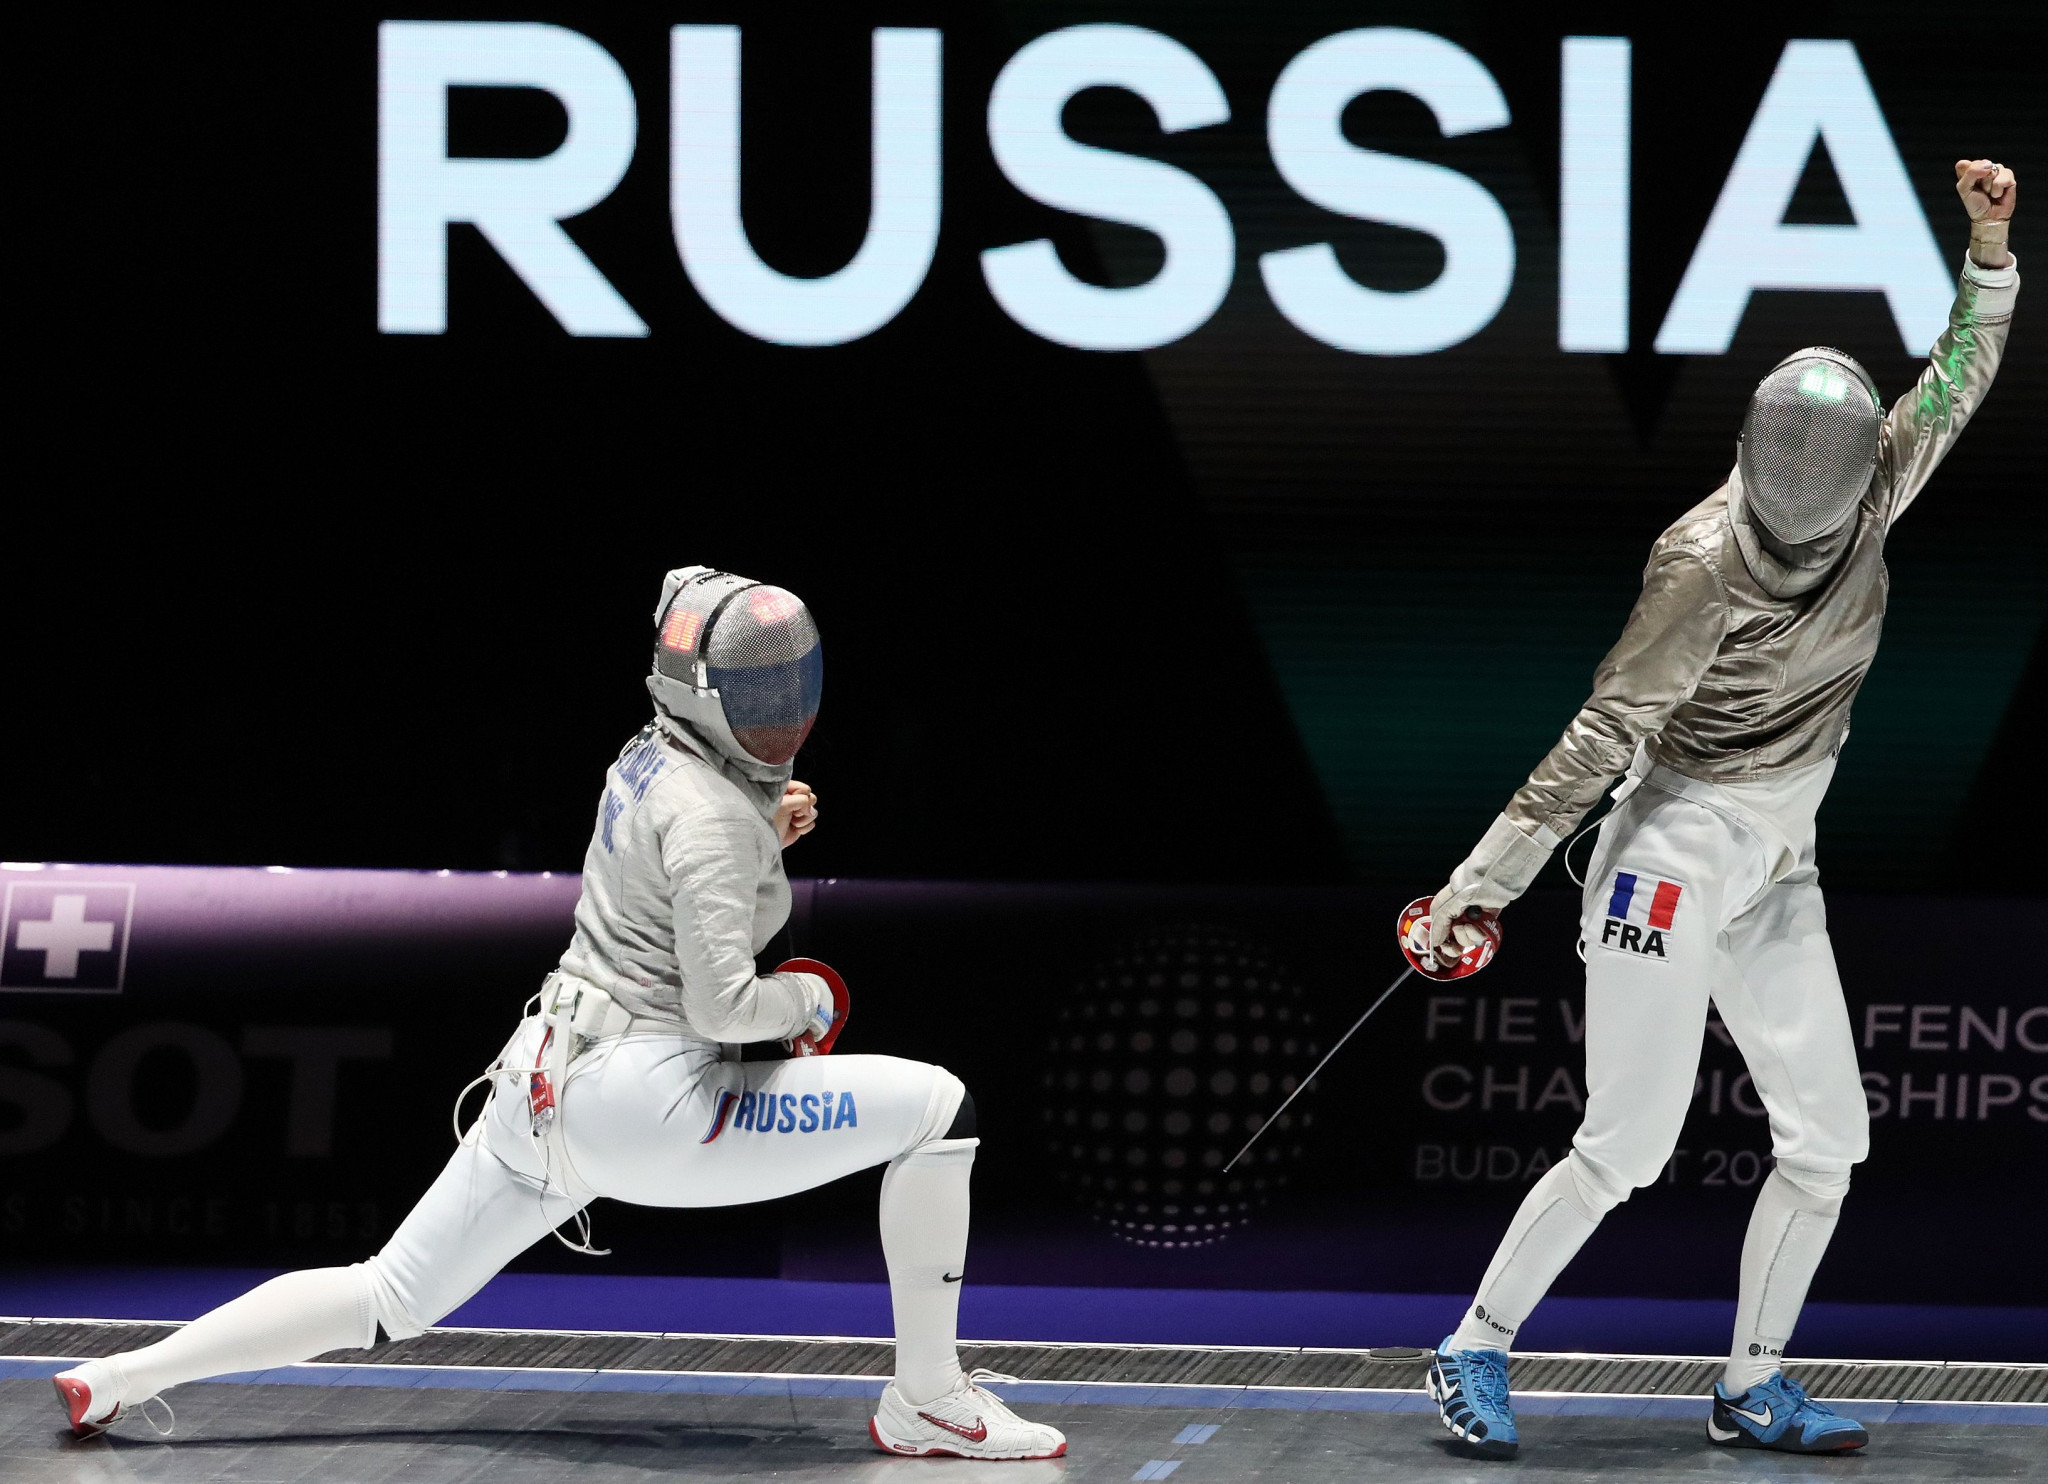 Russian Fencing Federation President Ilgar Mammadov is among those to criticise Sir Craig's comments ©Getty Images